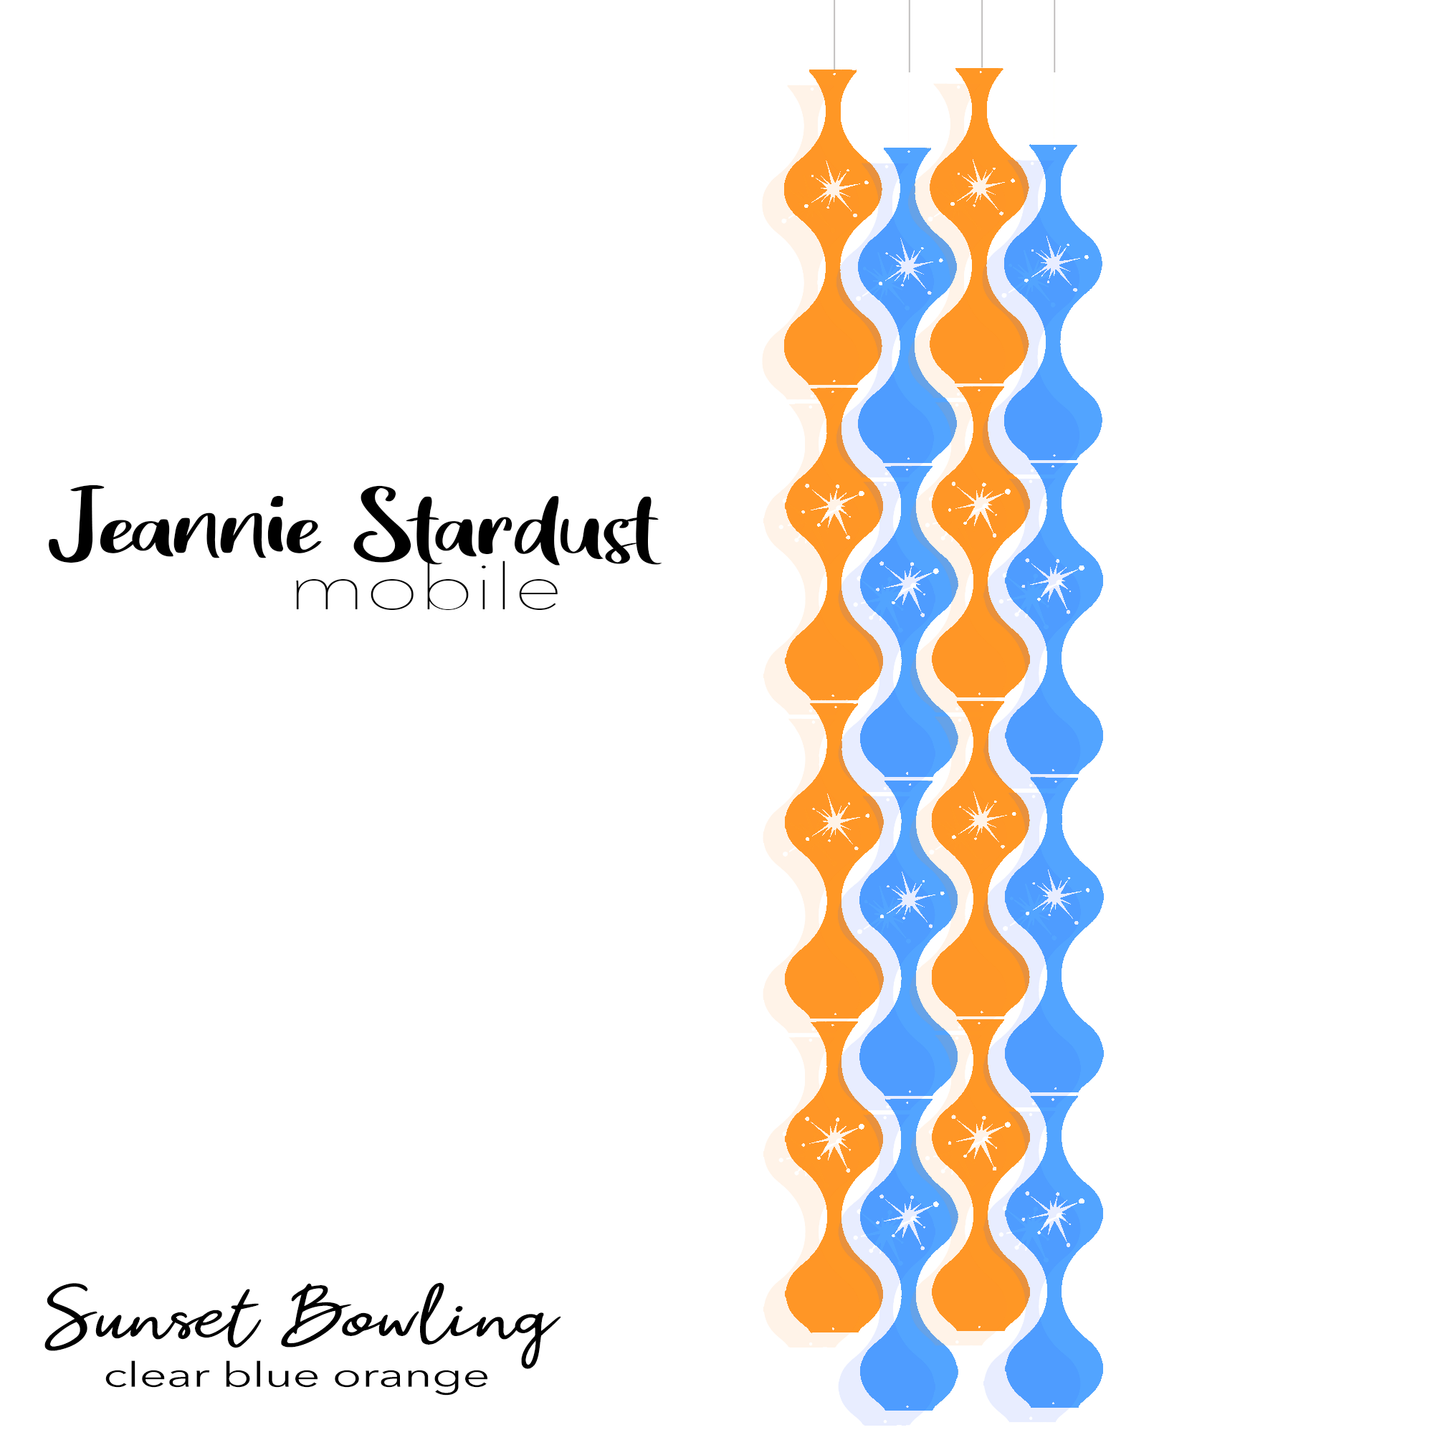  Jeannie Stardust Sunset Bowling - Clear orange and blue plexiglass acrylic hanging art mobiles in mid century modern style for home decor by AtomicMobiles.com